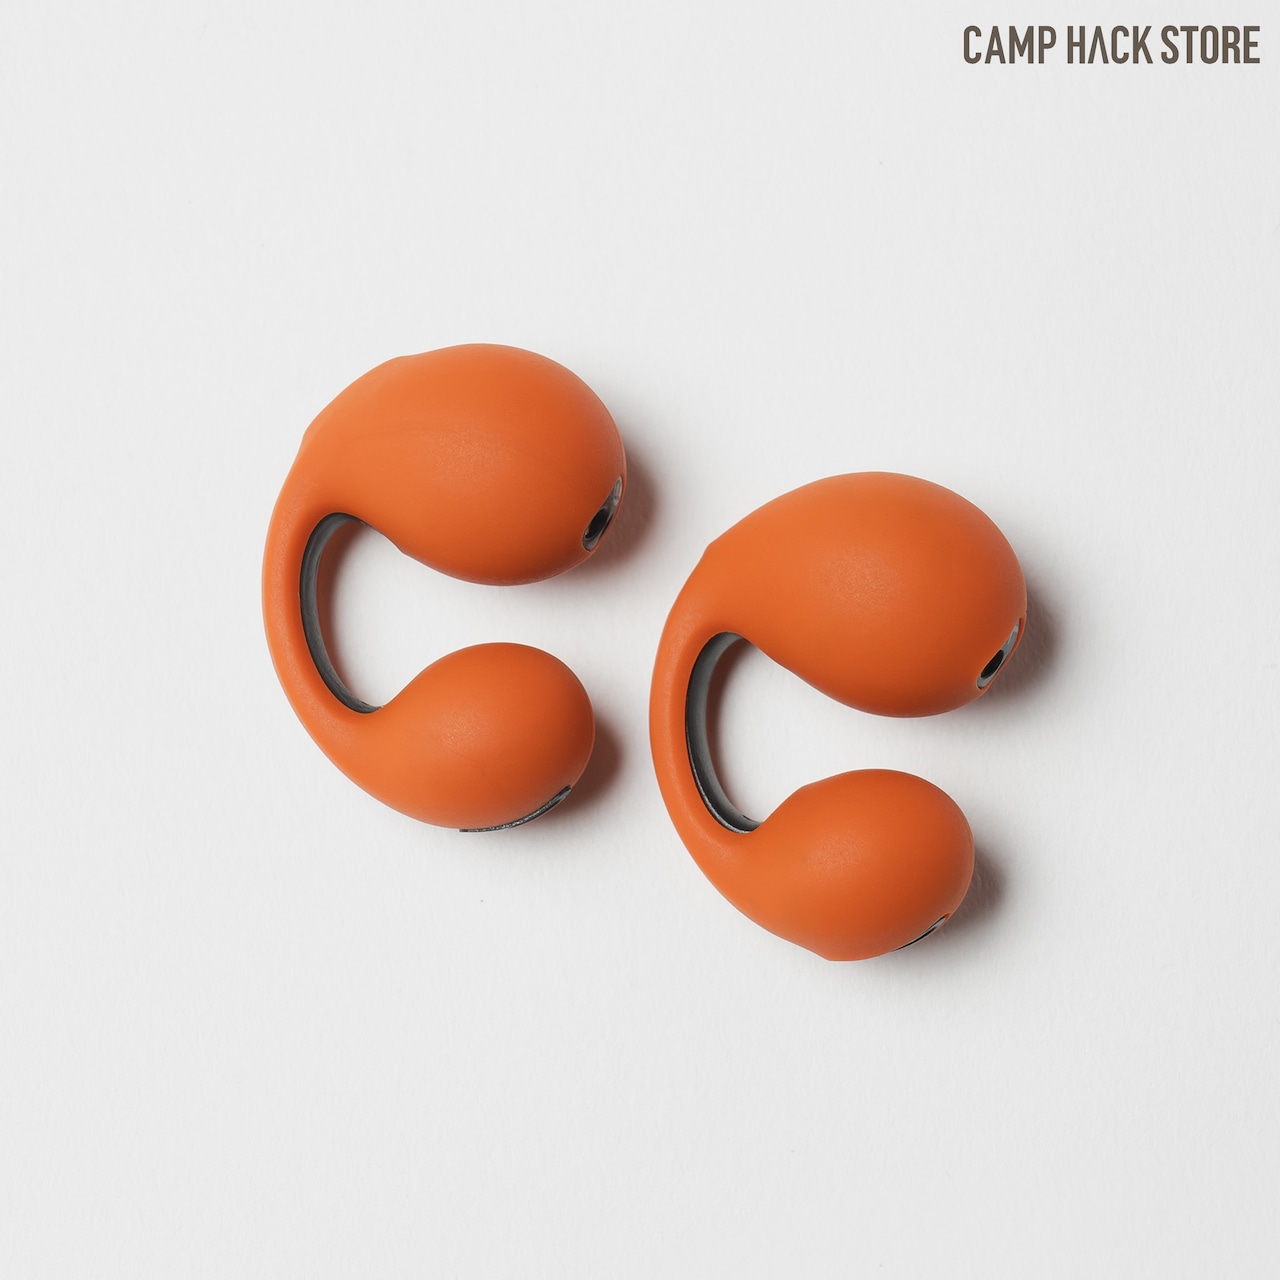 ambie / soundearcuffs （CAMP HACK exclusive）